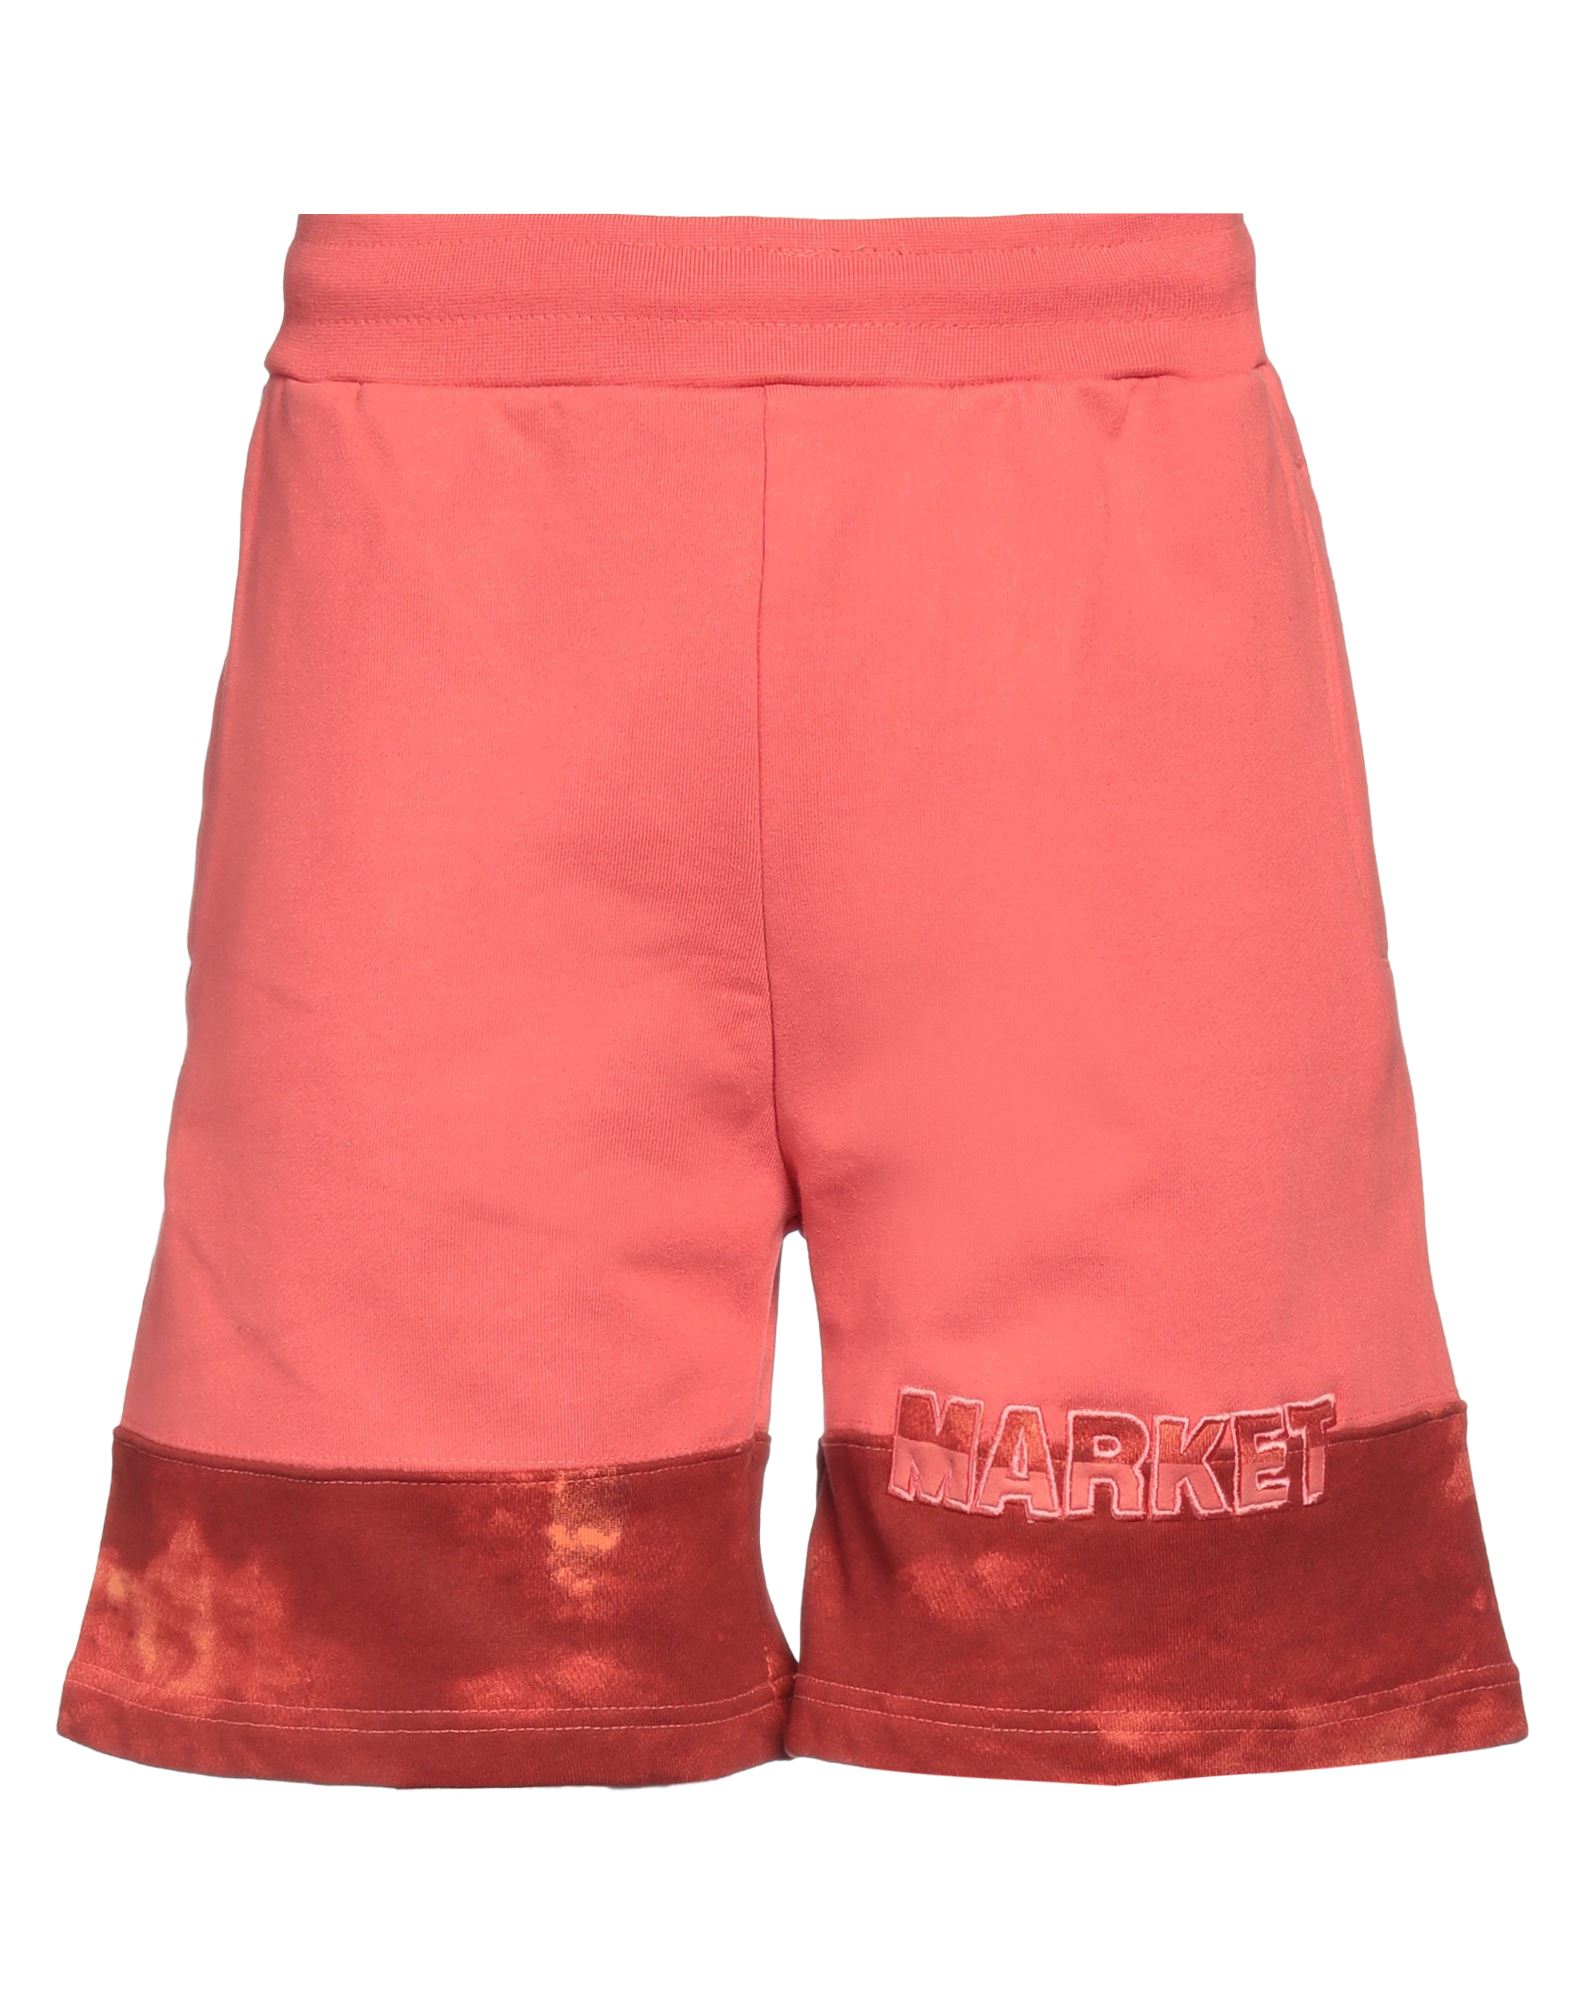 Markup Man Shorts & Bermuda Shorts Coral Size M Cotton In Red